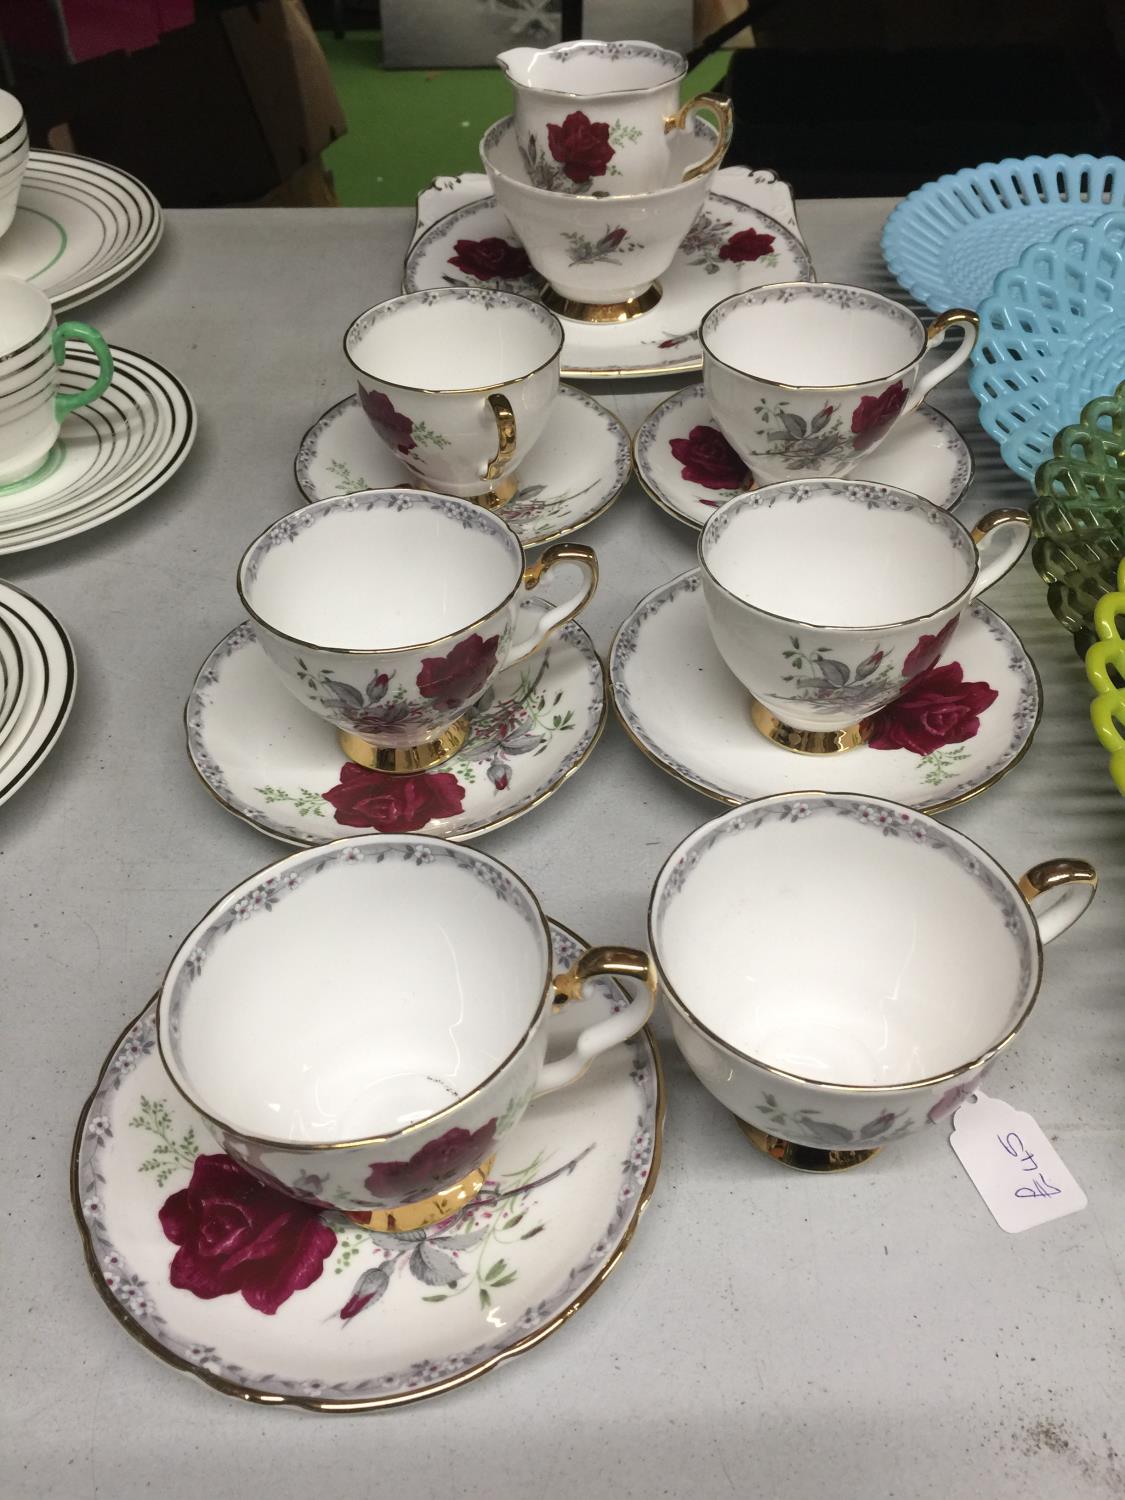 A ROYAL STAFFORD 'ROSES TO REMEMBER' TEASET TO INCLUDE CREAM JUG, SUGAR BOWL, CAKE PLATE, SIX CUPS